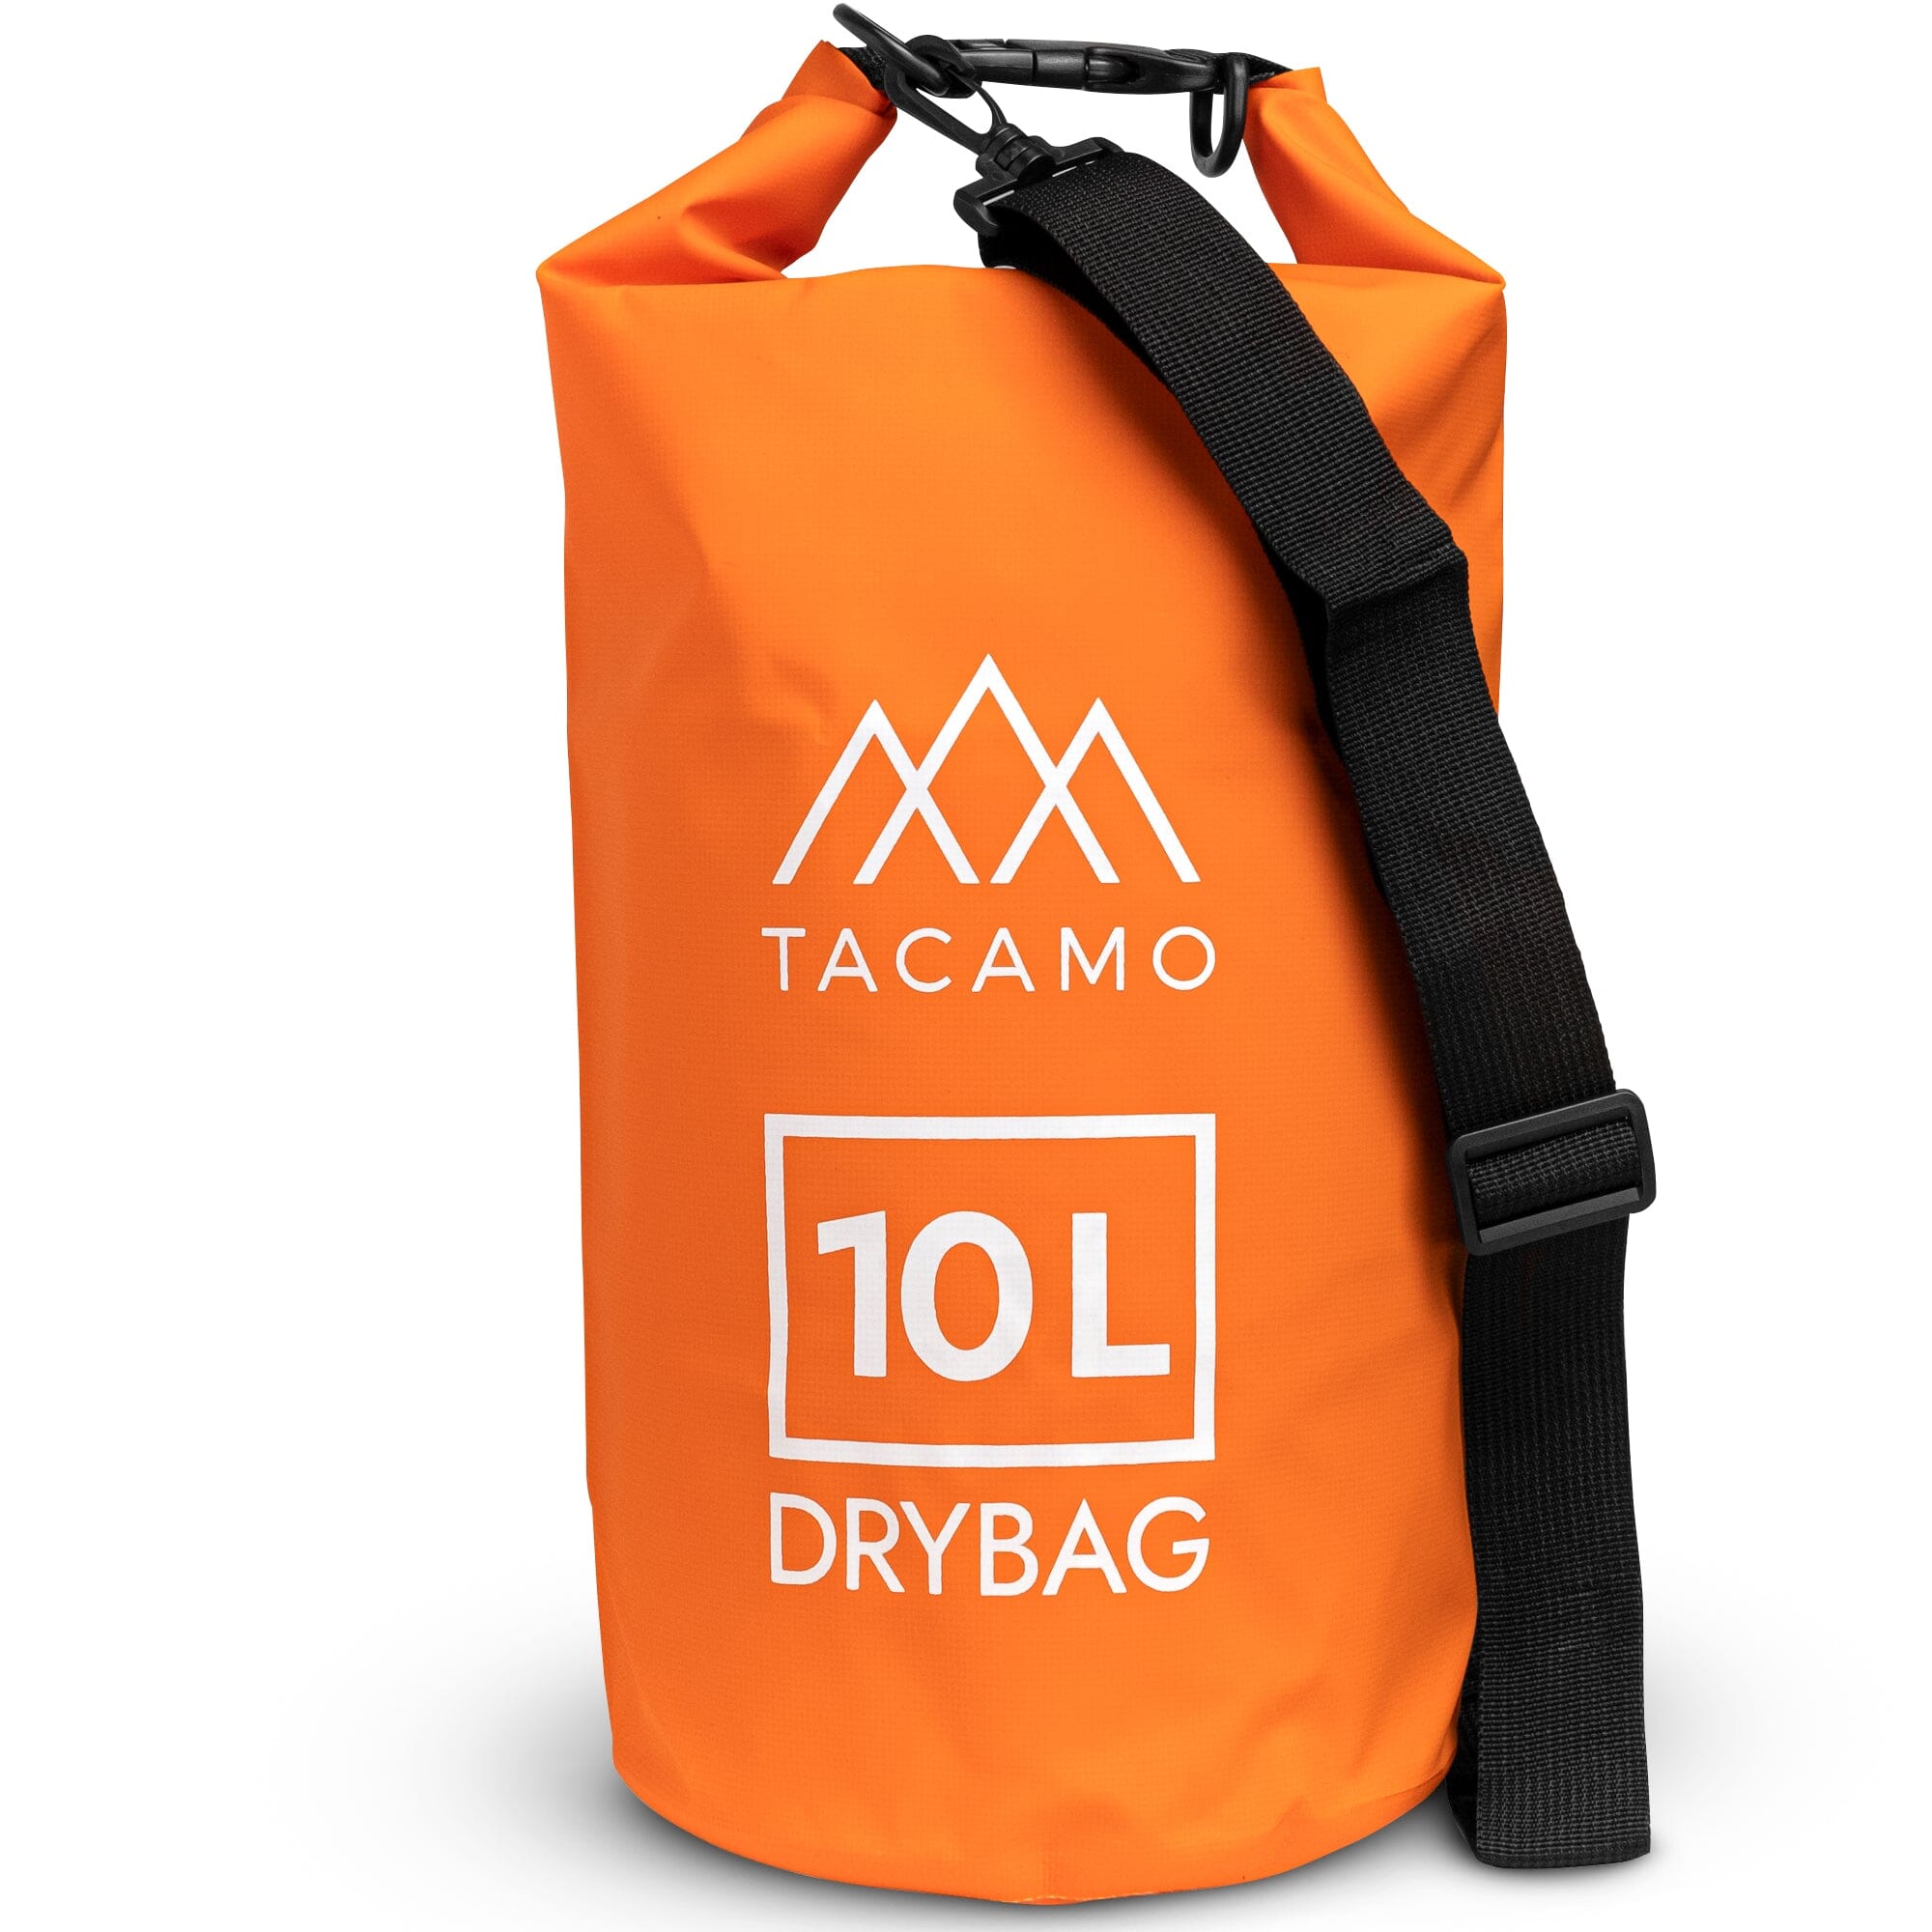 Branded Waterproof Bag: 5 Ways to Promote your Brand with Style